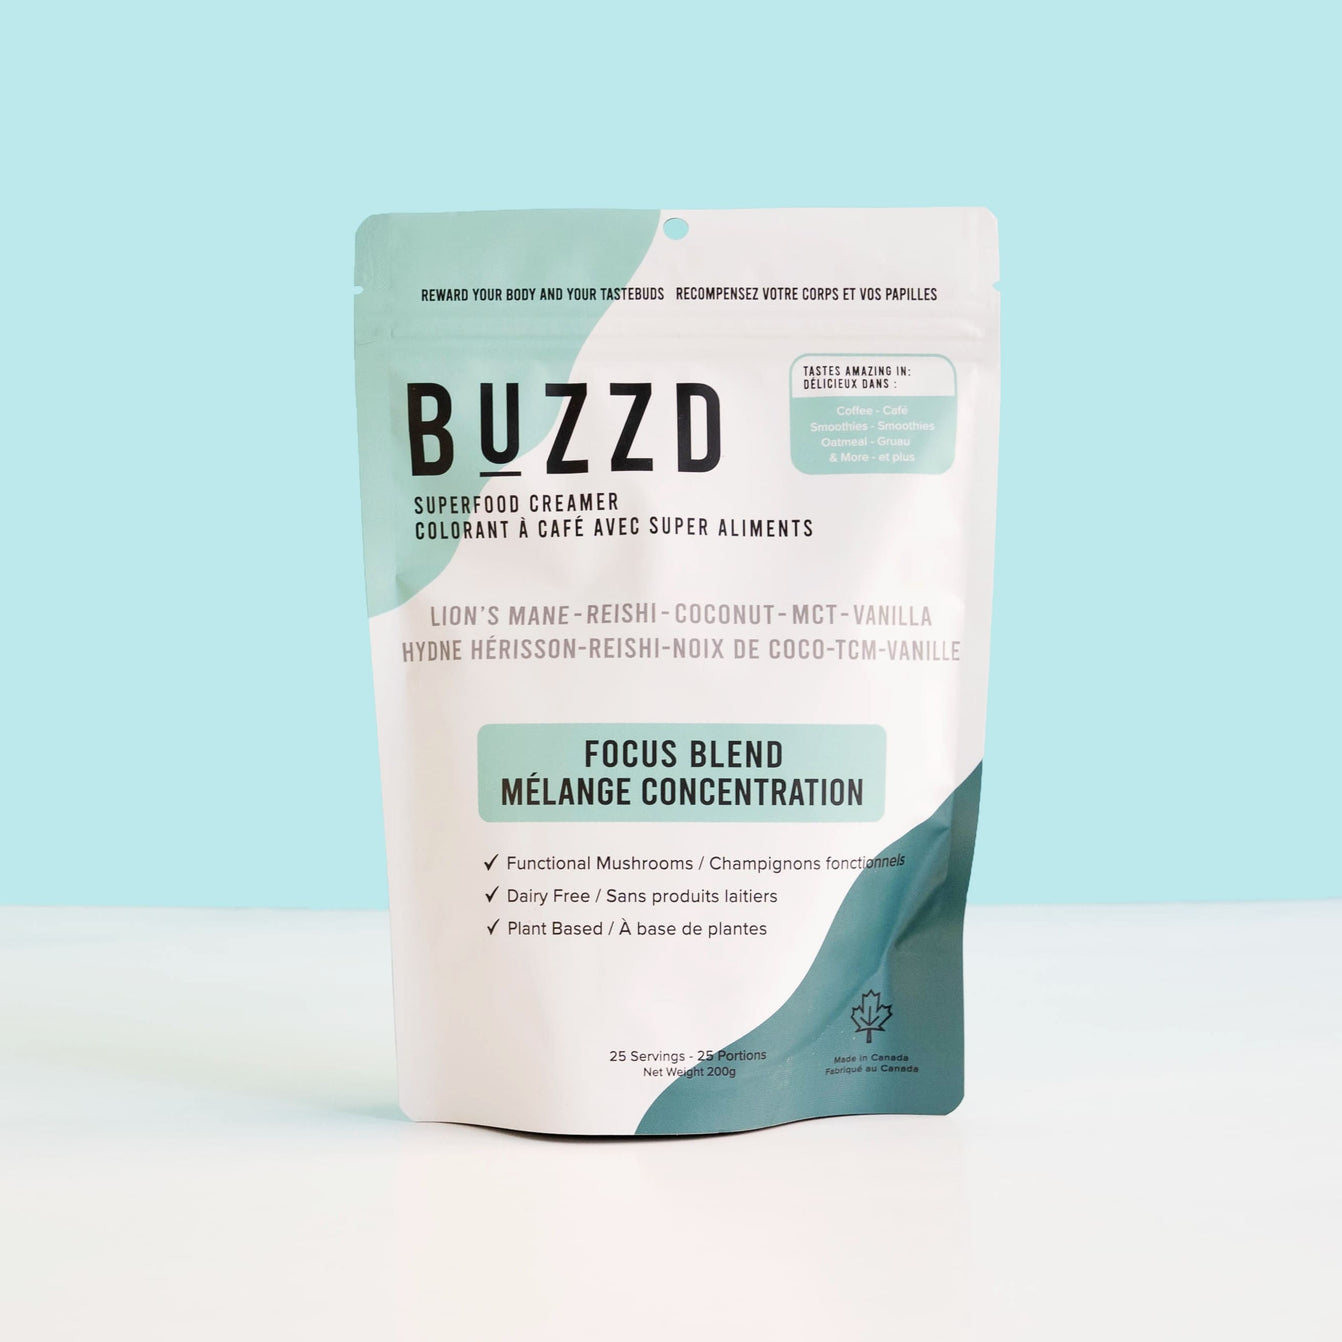 buzzd superfood creamer focus blend with lion's mane mushroom and reishi